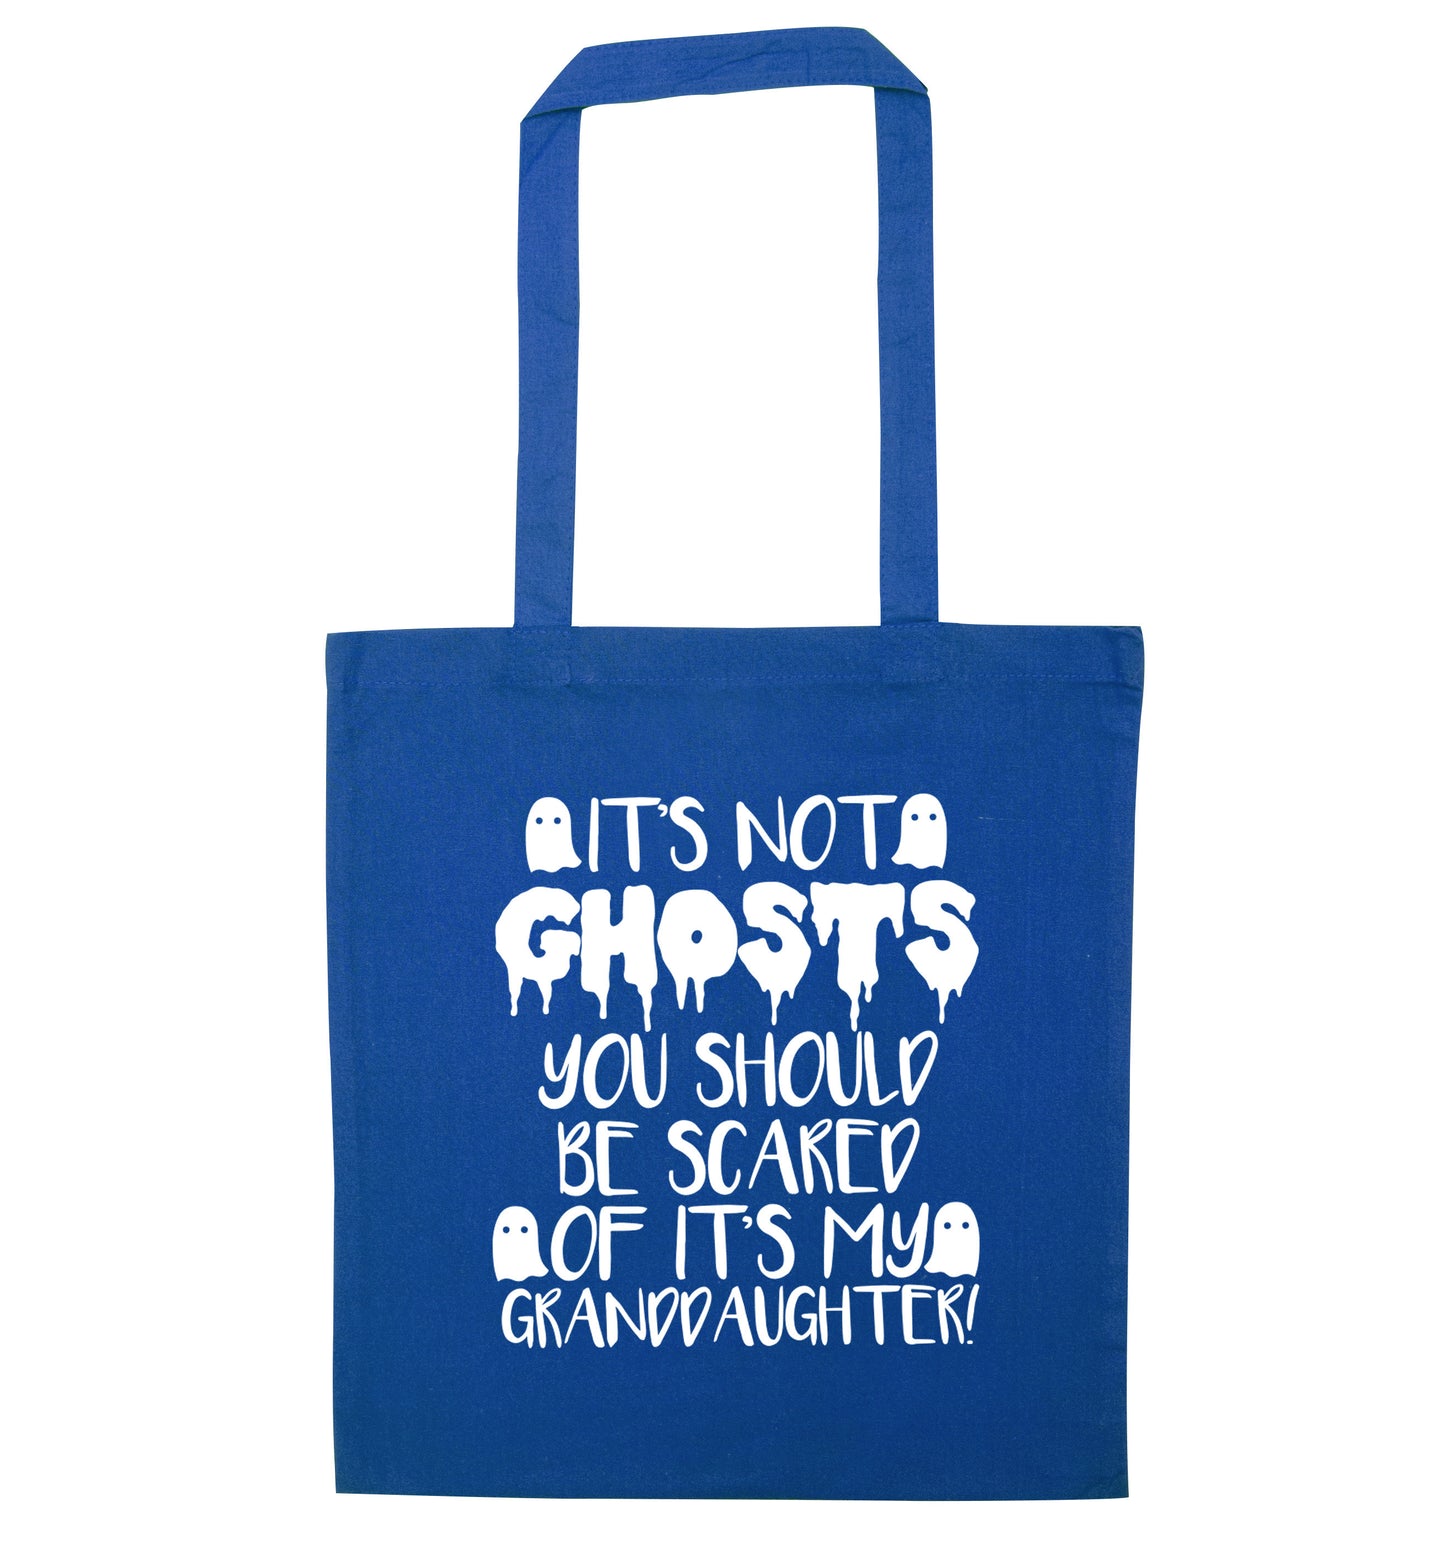 It's not ghosts you should be scared of it's my granddaughter! blue tote bag